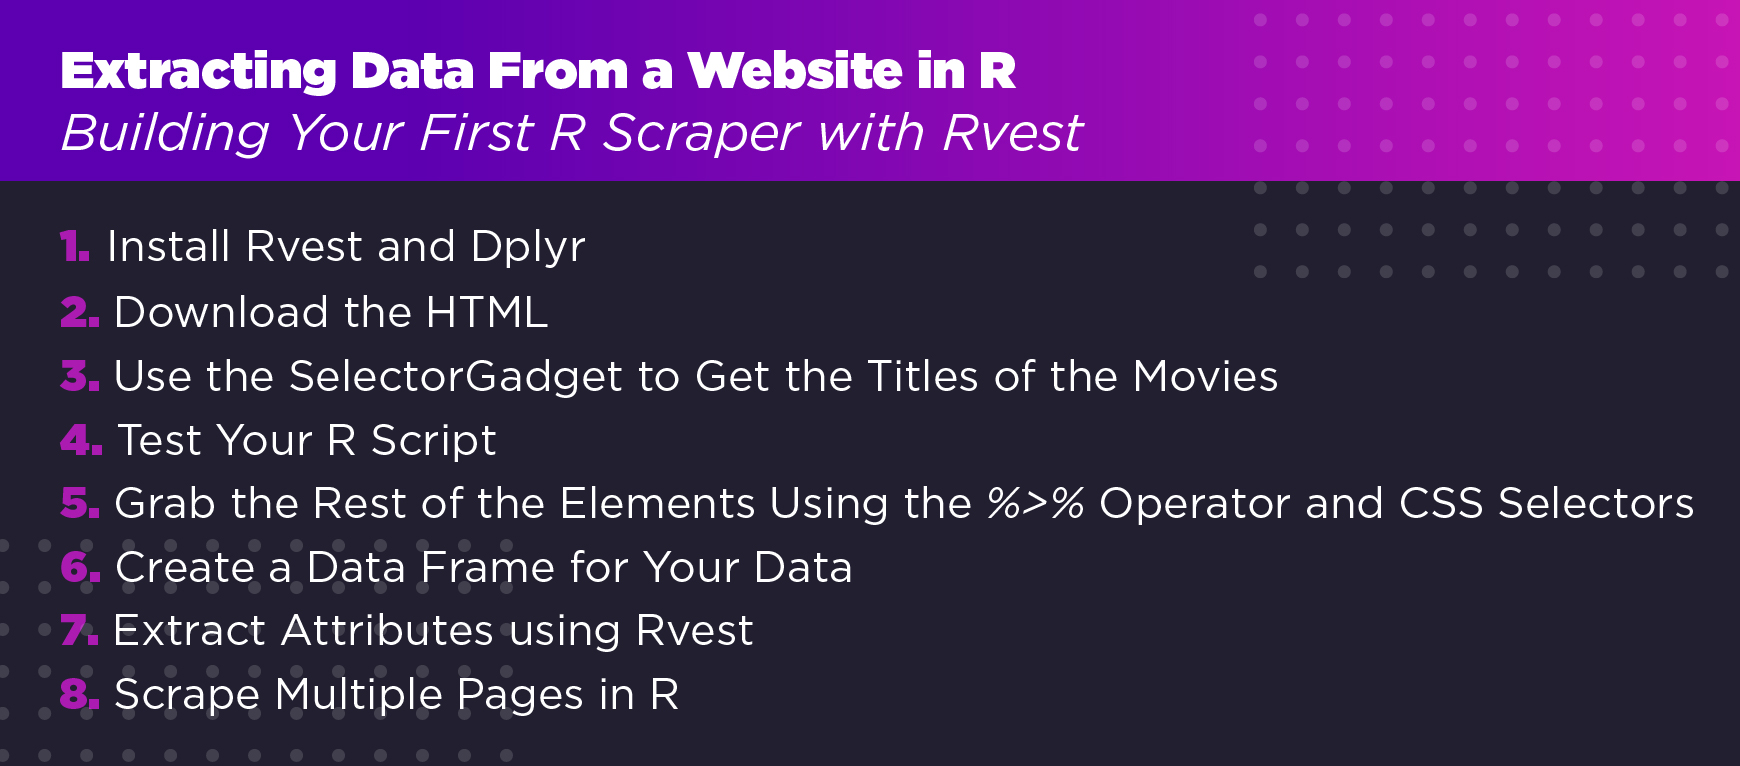 Extracting Data From a Website in R: Building Your First R Scraper with Rvest